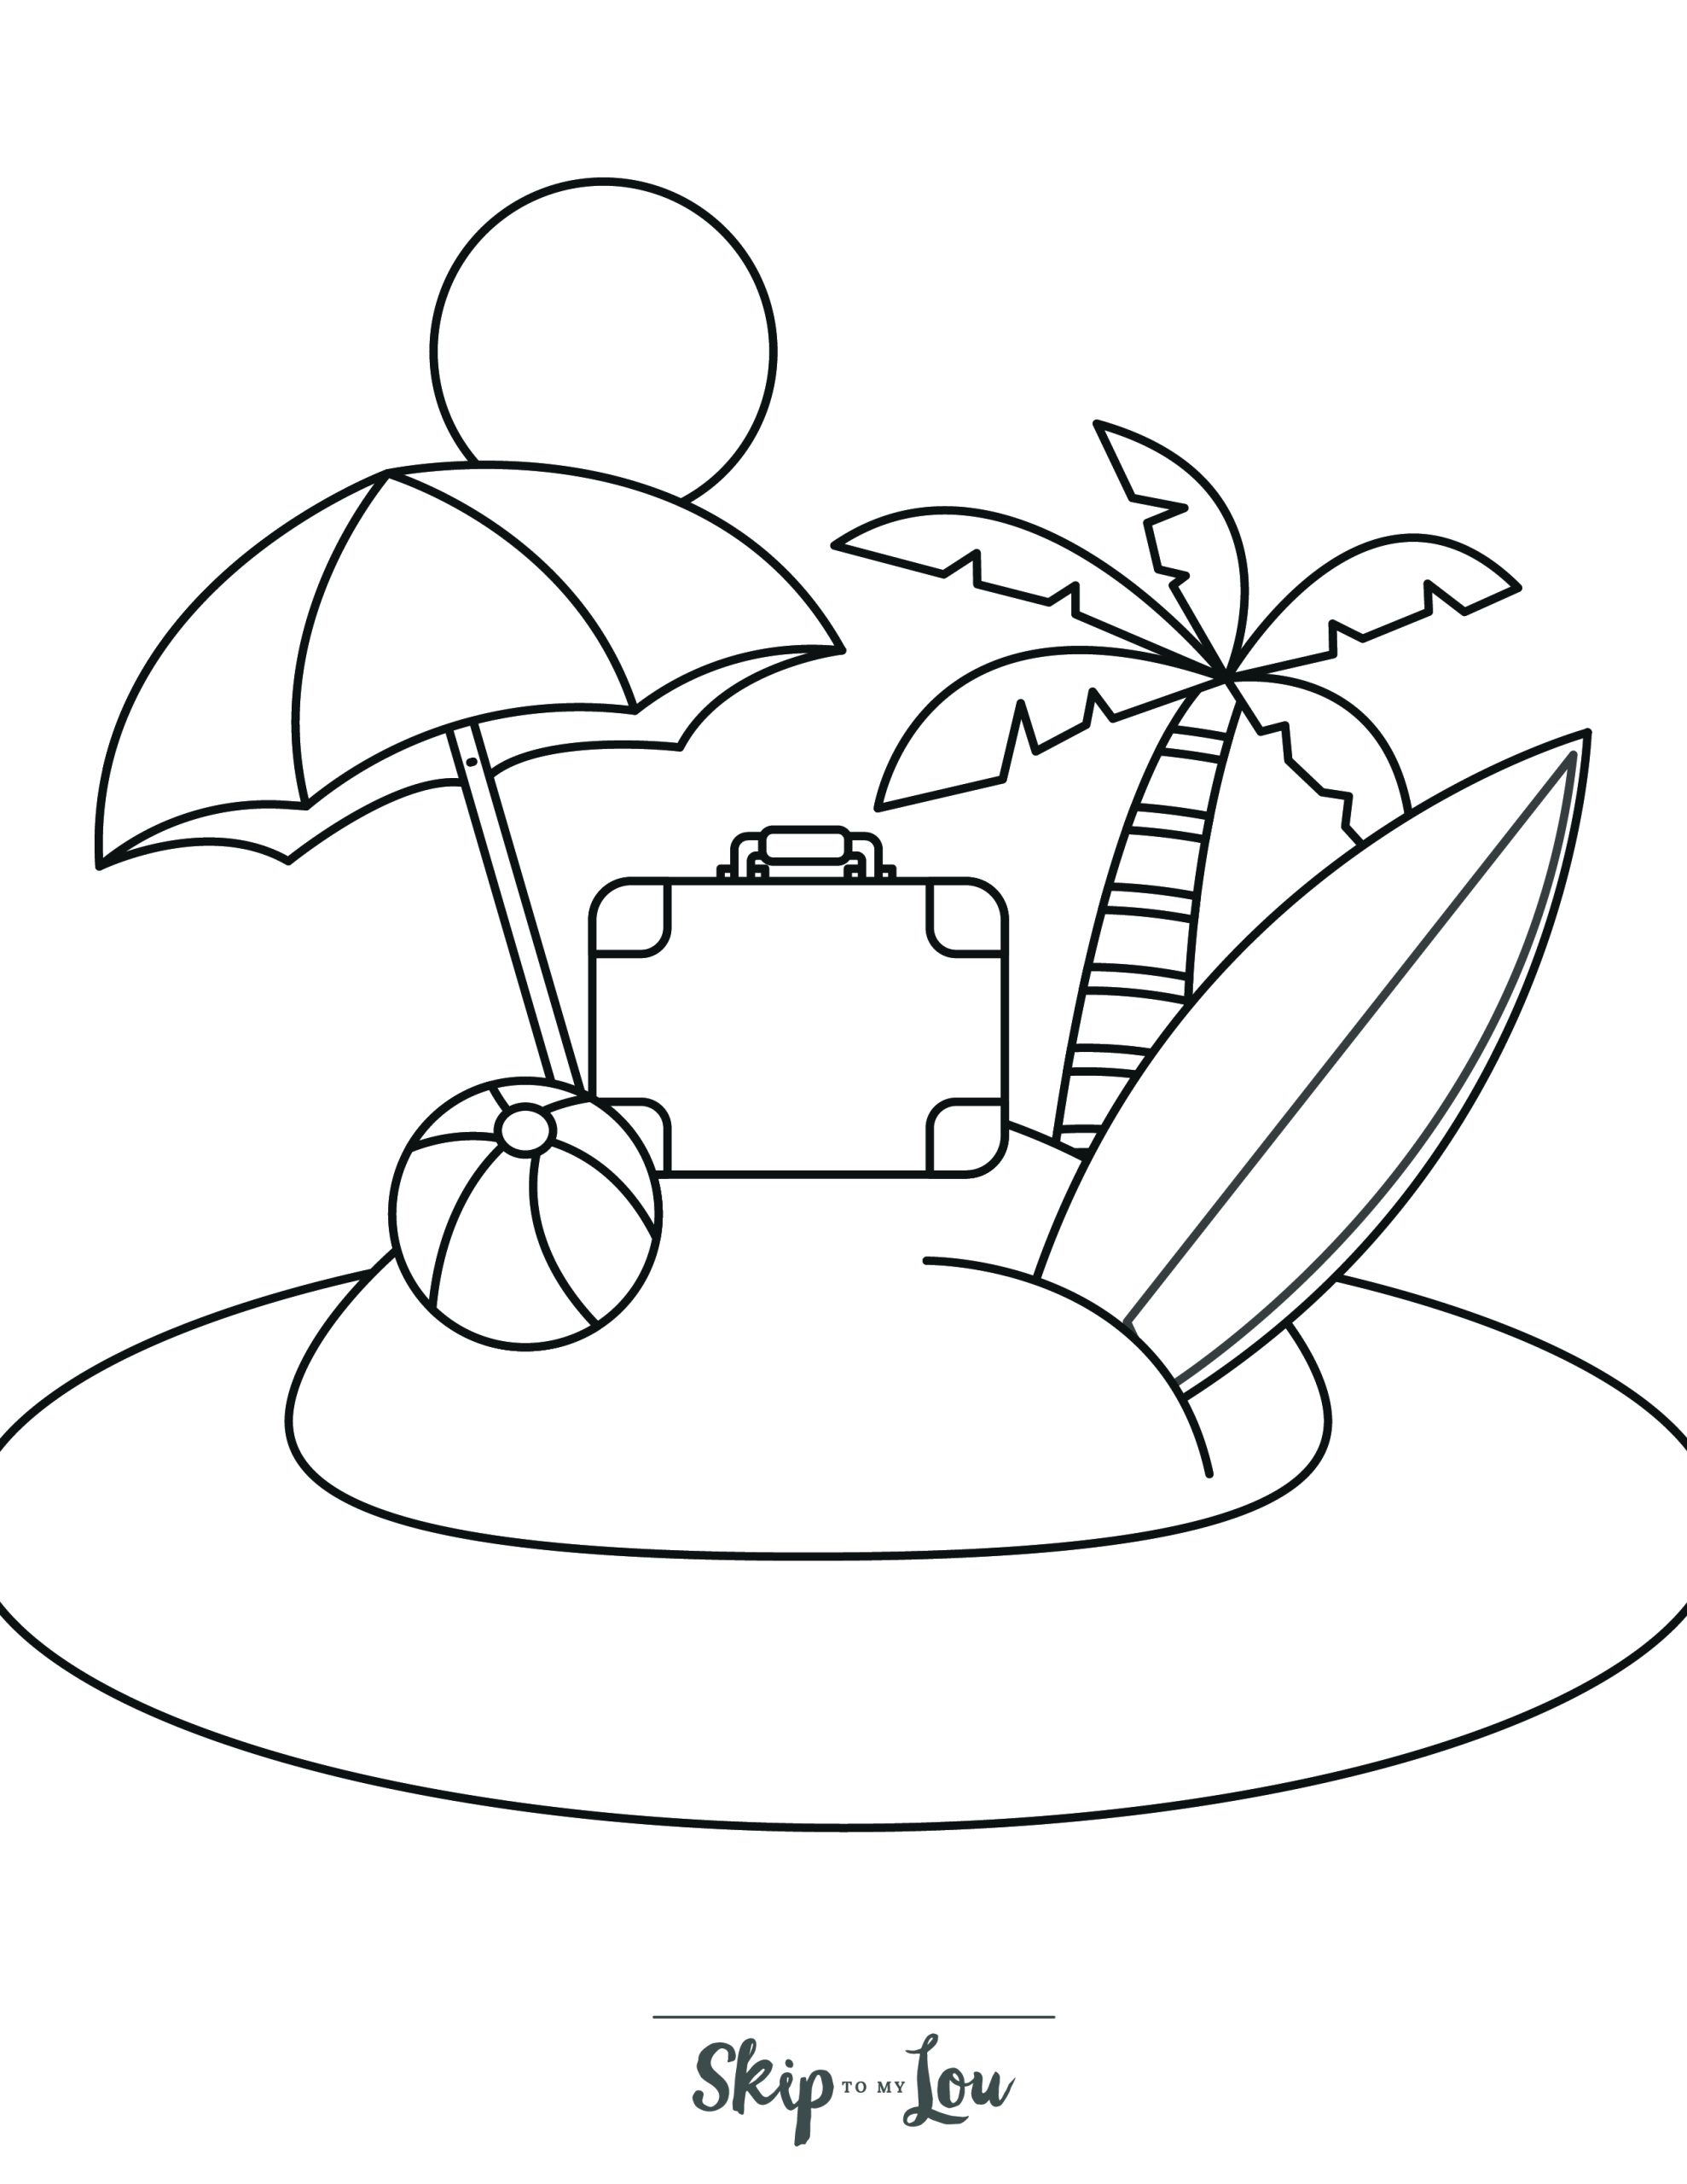 Fun printable beach coloring pages with free download skip to my lou